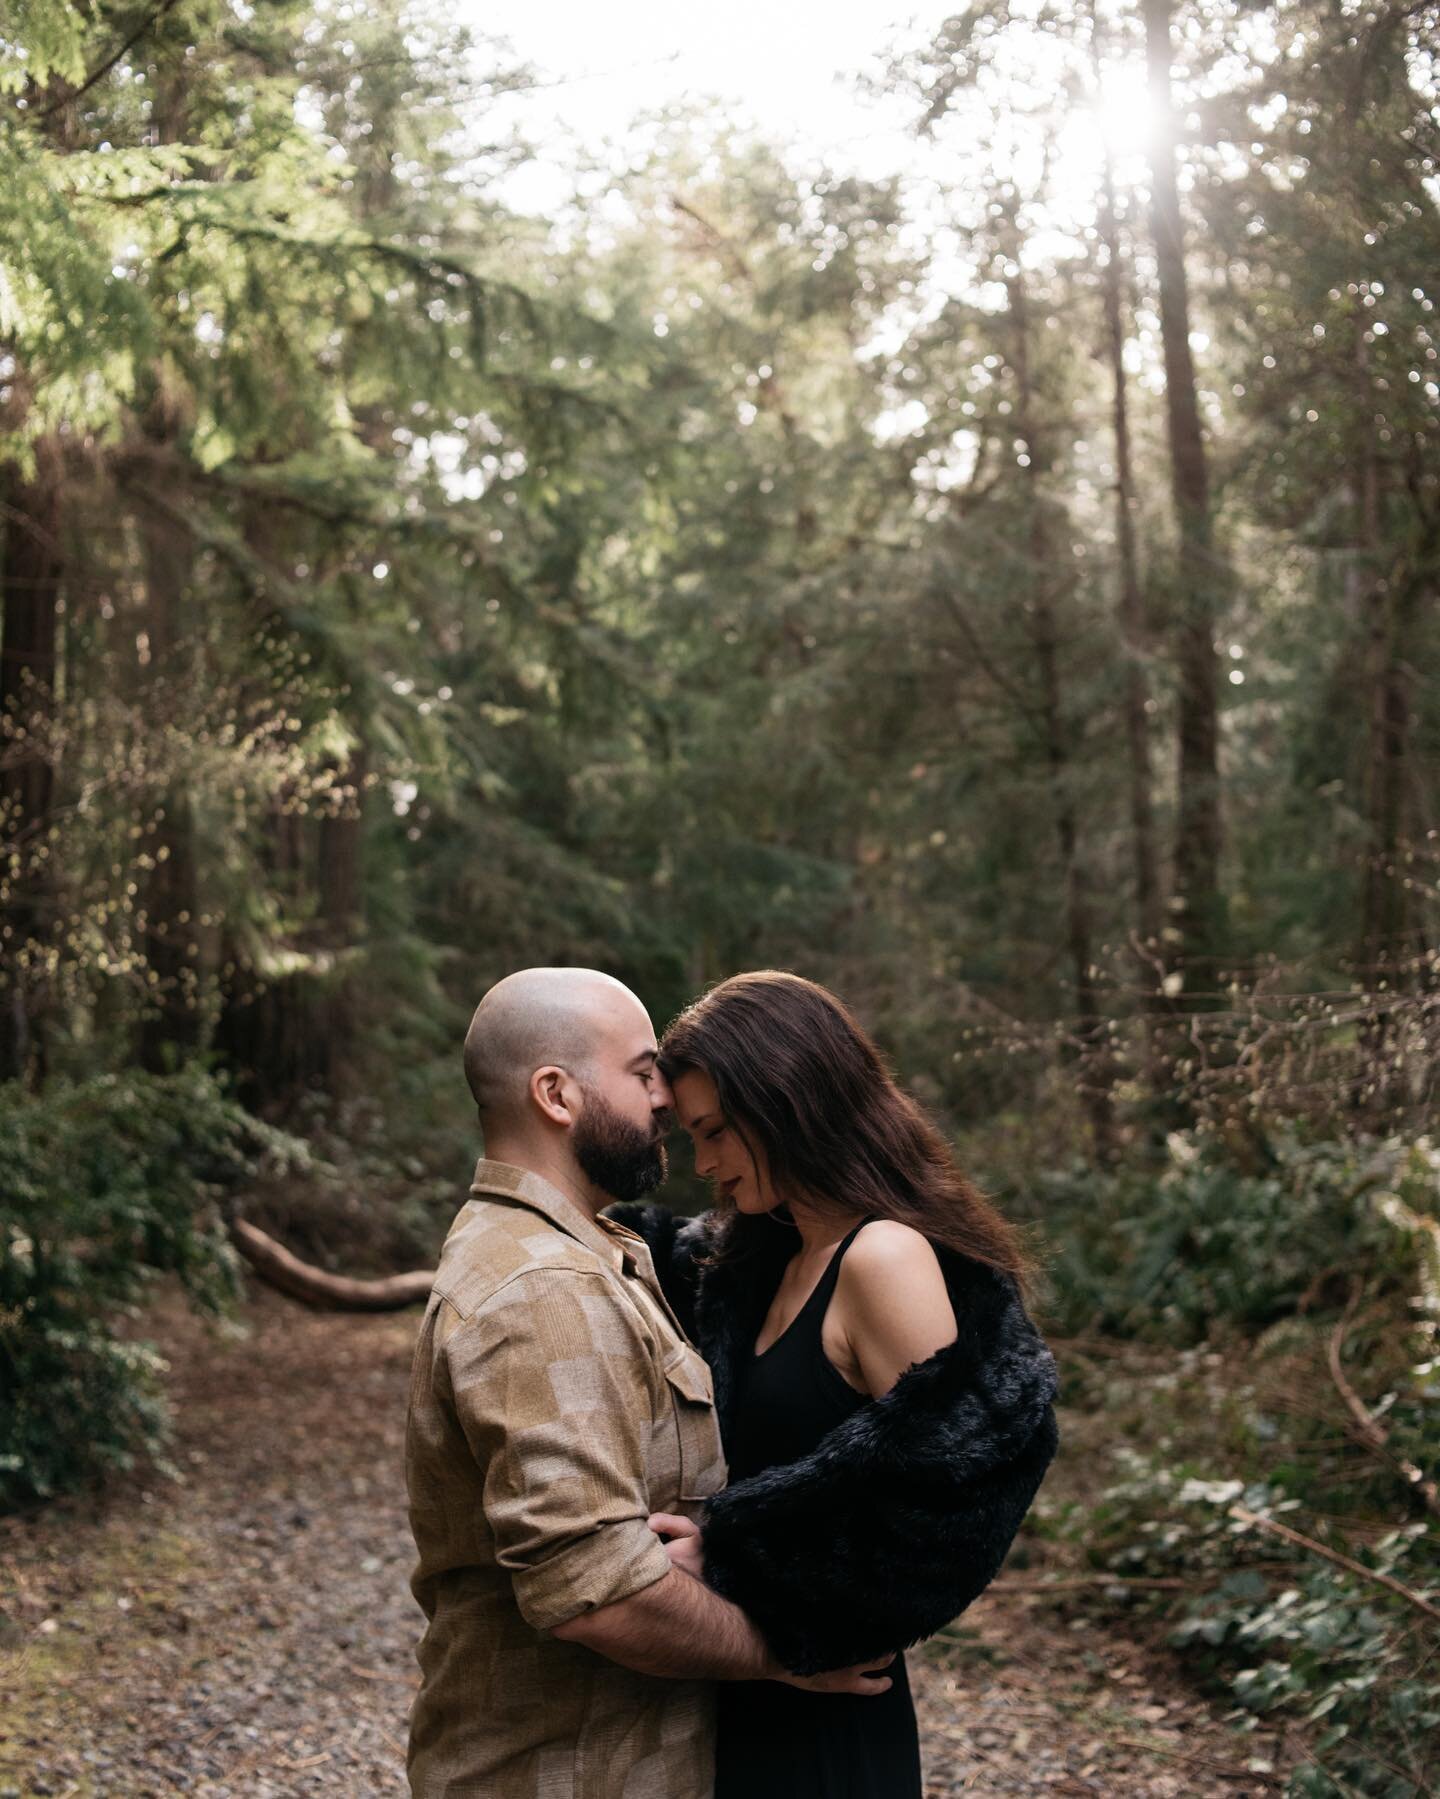 Headed out for R + As reception. ✨can&rsquo;t wait to celebrate them so hard tonight 🖤

#tacomaengagementphotographer #seattleengagementphotographer #engagementphotos #pnwengagementphotographer #engagmentphotography #washingtonengagementphotographer